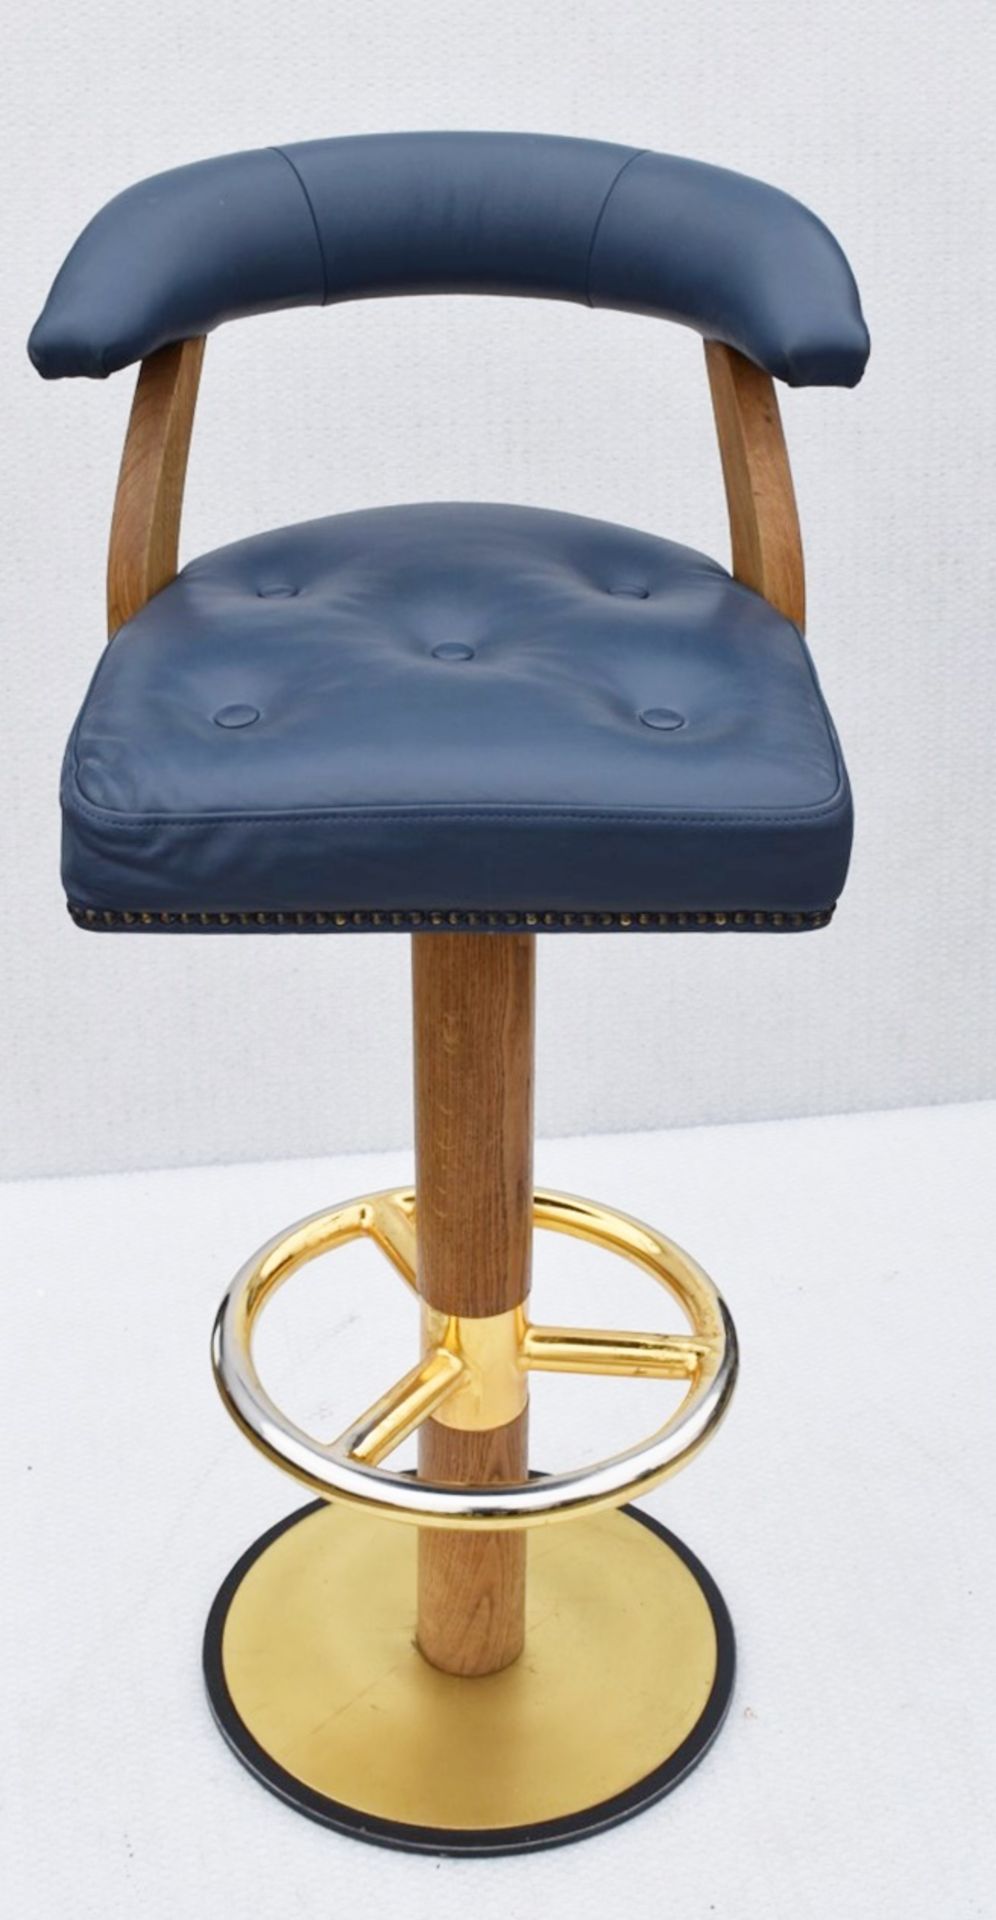 1 x Luxury Buttoned Bar Stool with Wooden Frame, Metal Base, Footrest and Studded Upholstery in a